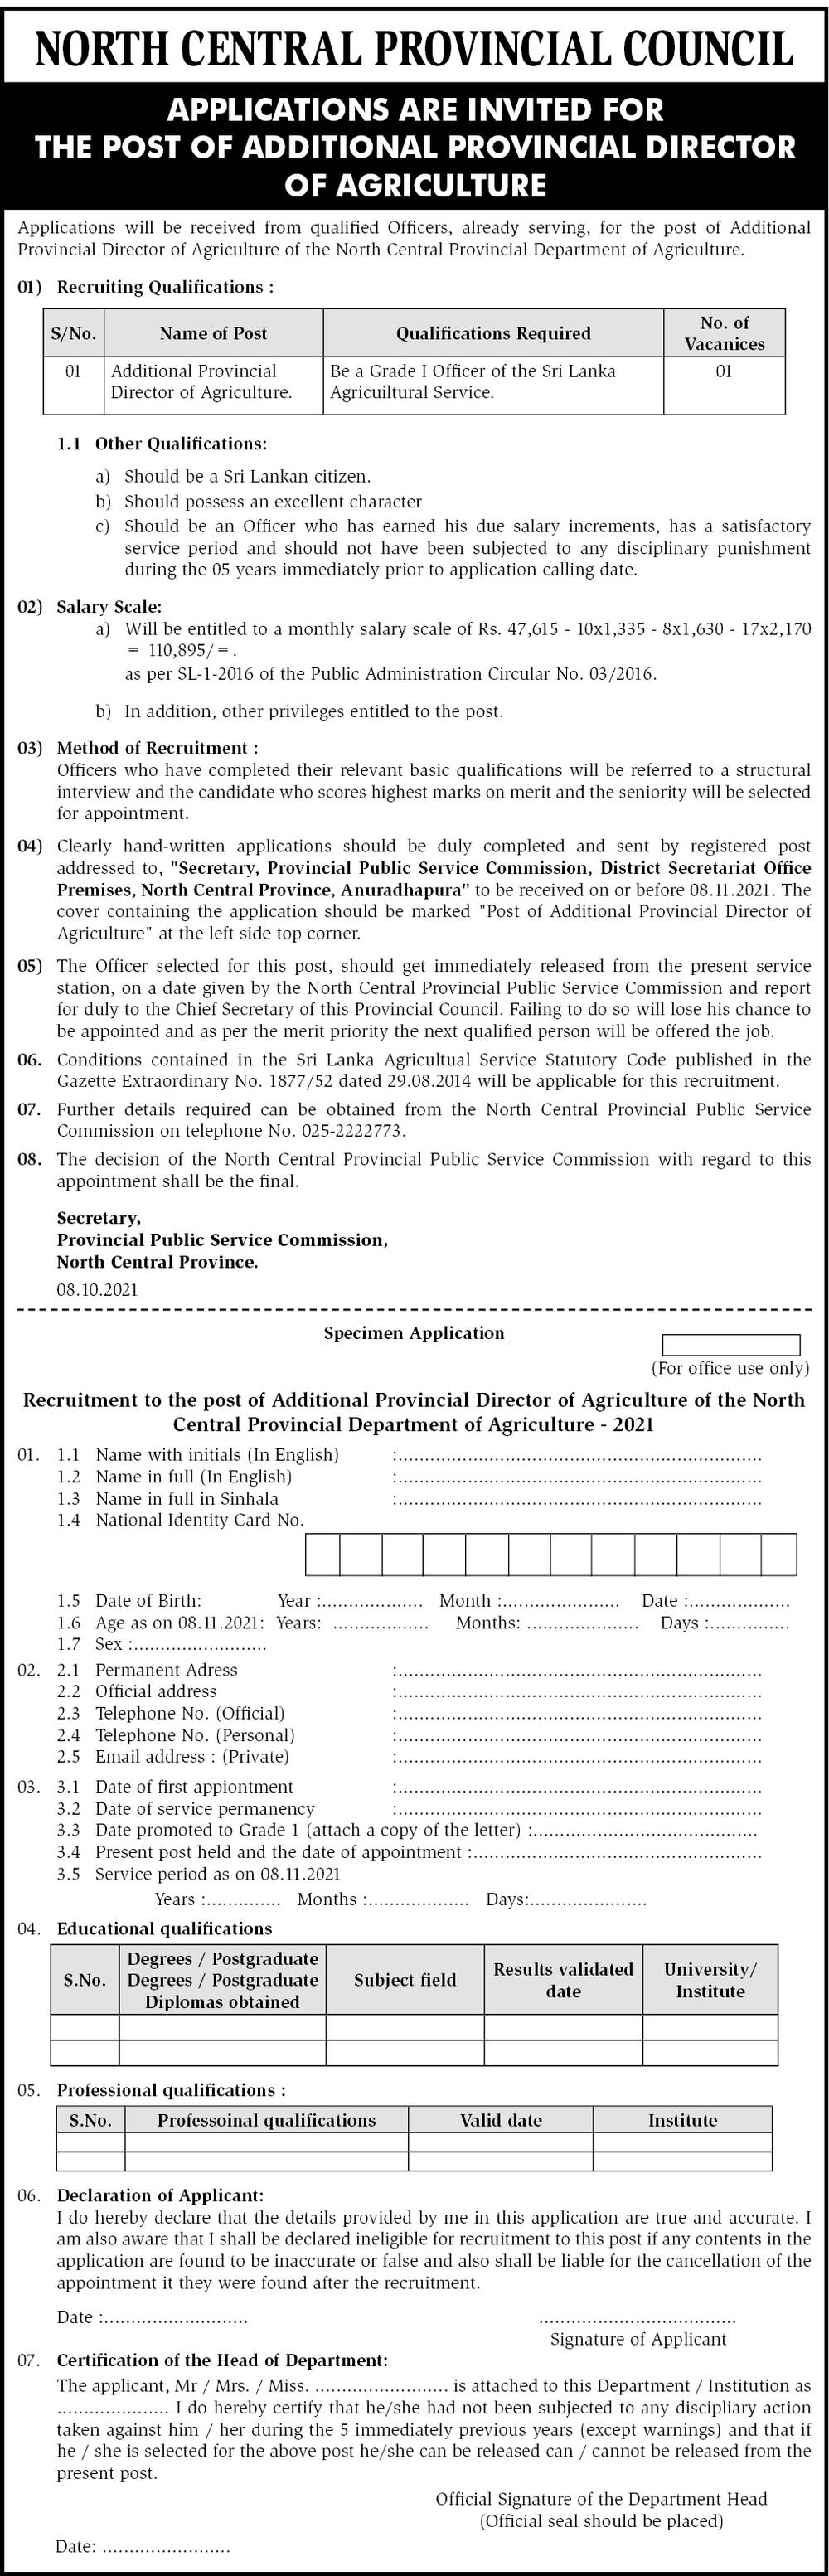 Additional Provincial Director of Agriculture - North Central Provincial Council